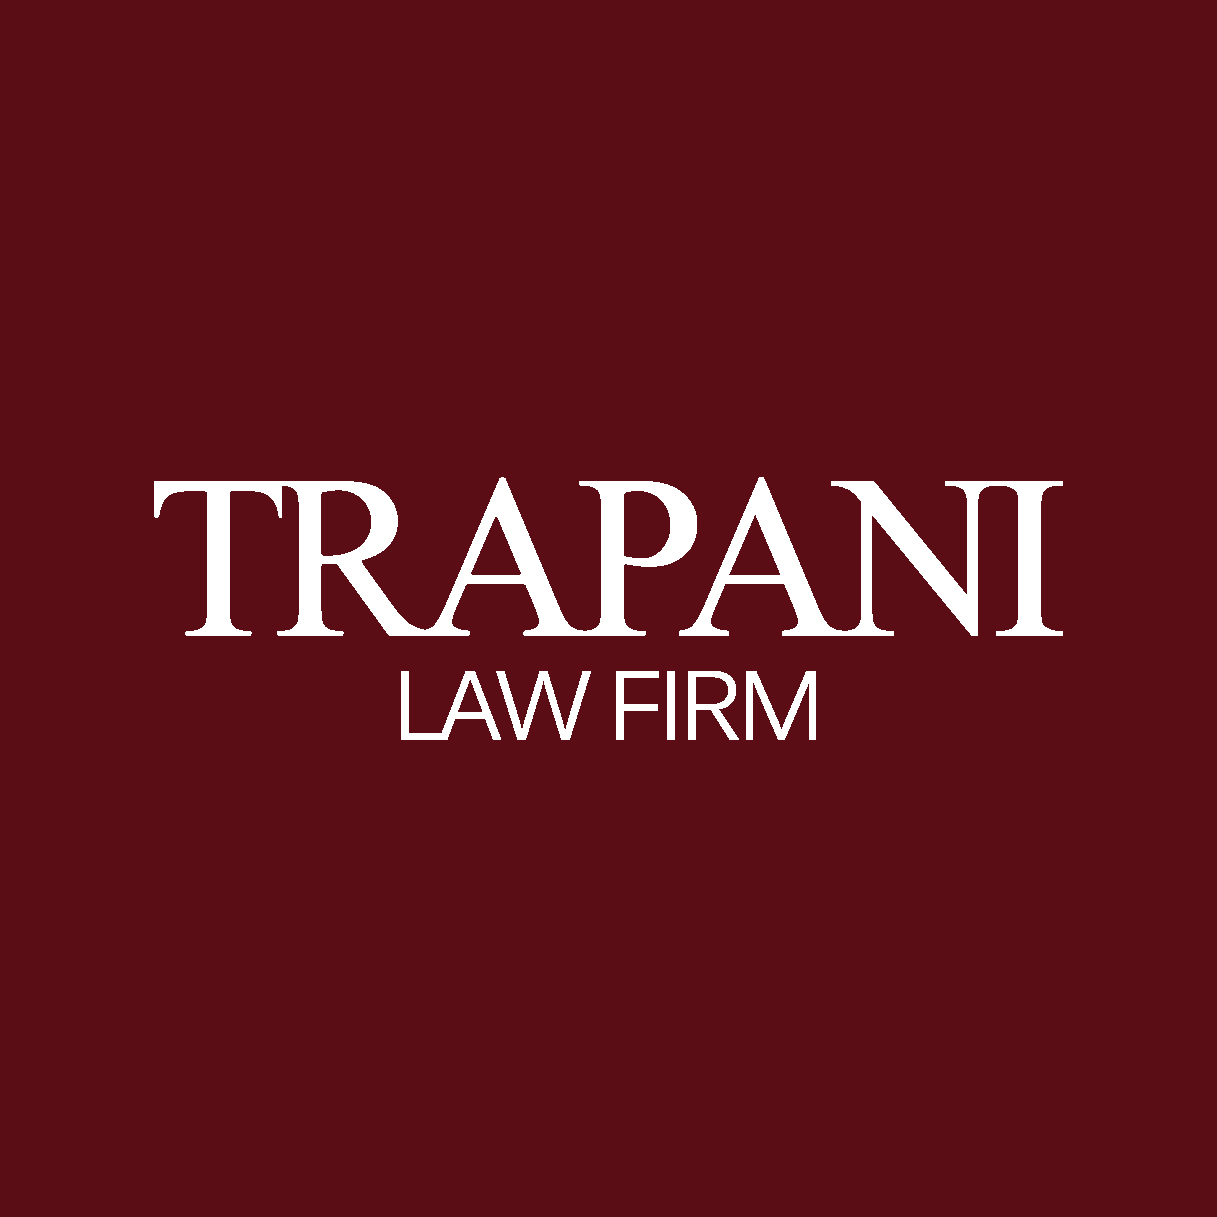 Trapani Law Firm - Allentown, PA 18102 - (610)351-2330 | ShowMeLocal.com